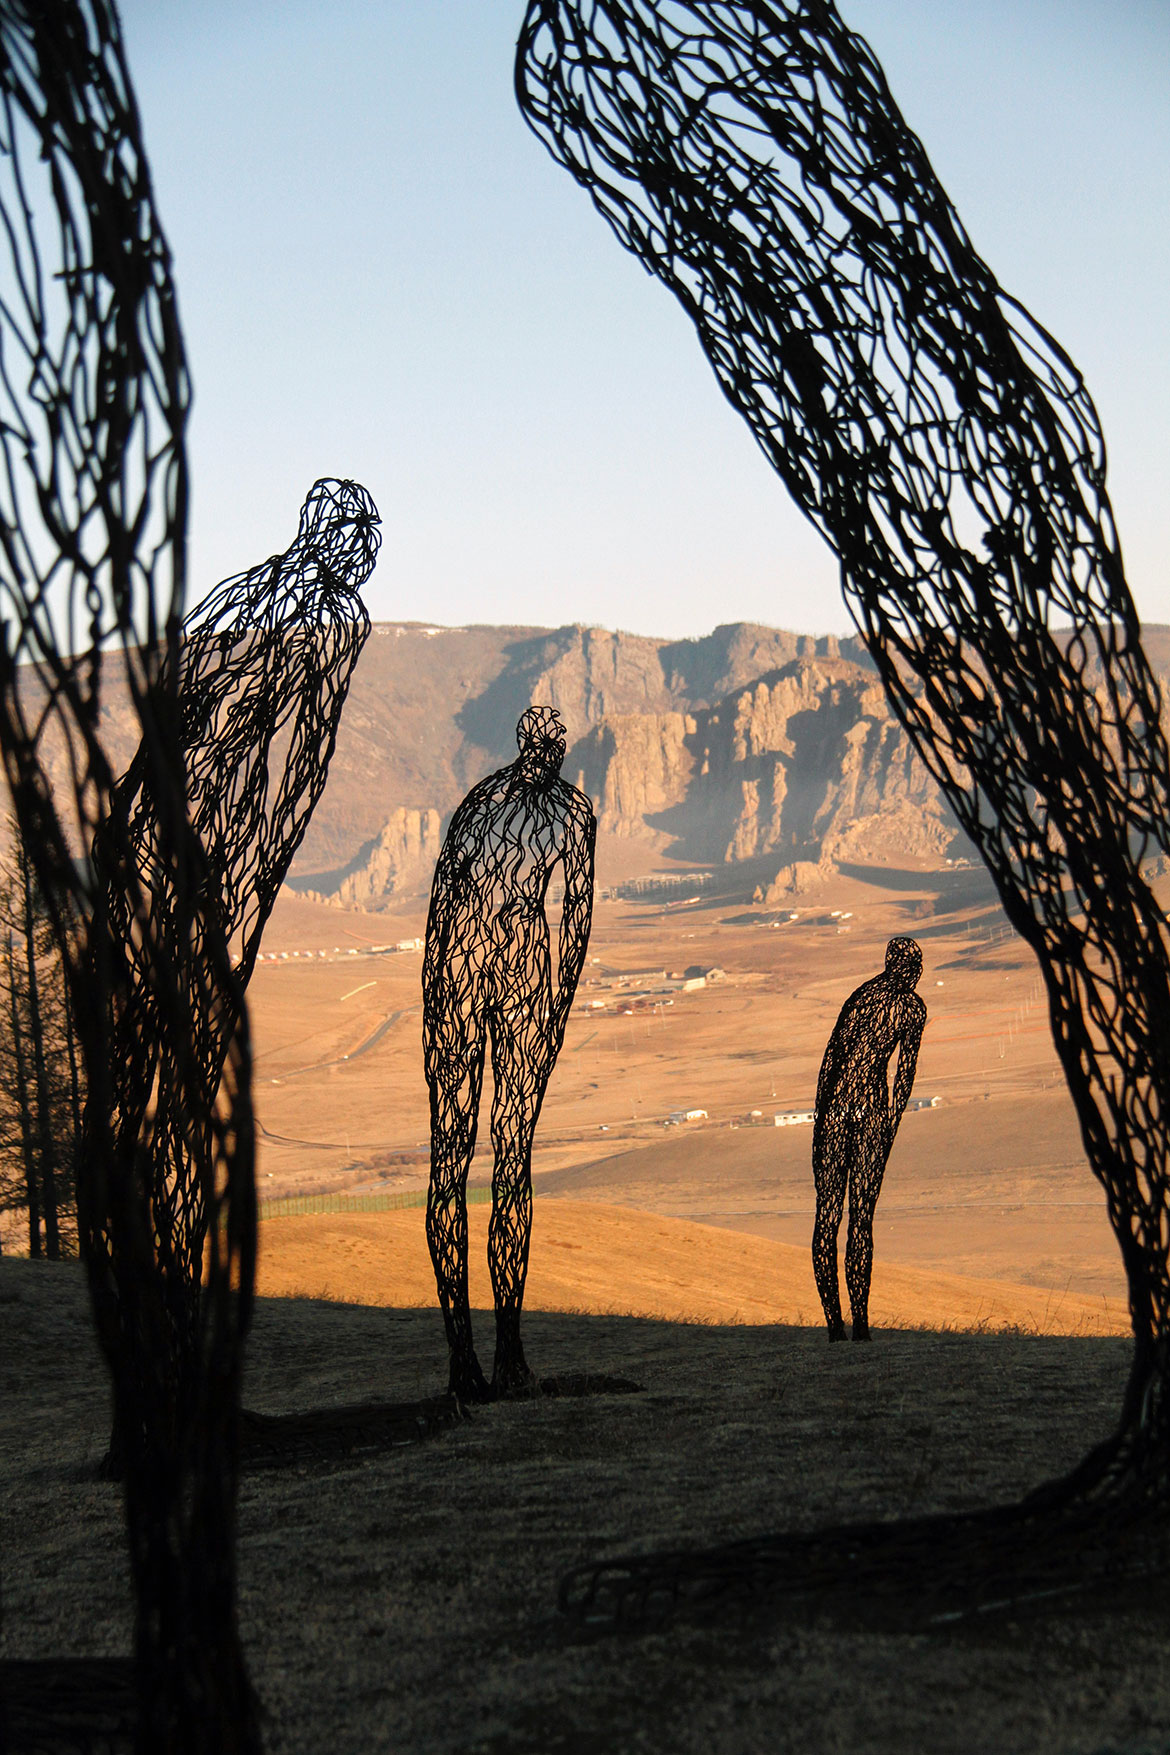 Photo of metal art figures in a dry, sunny landscape with blue sky